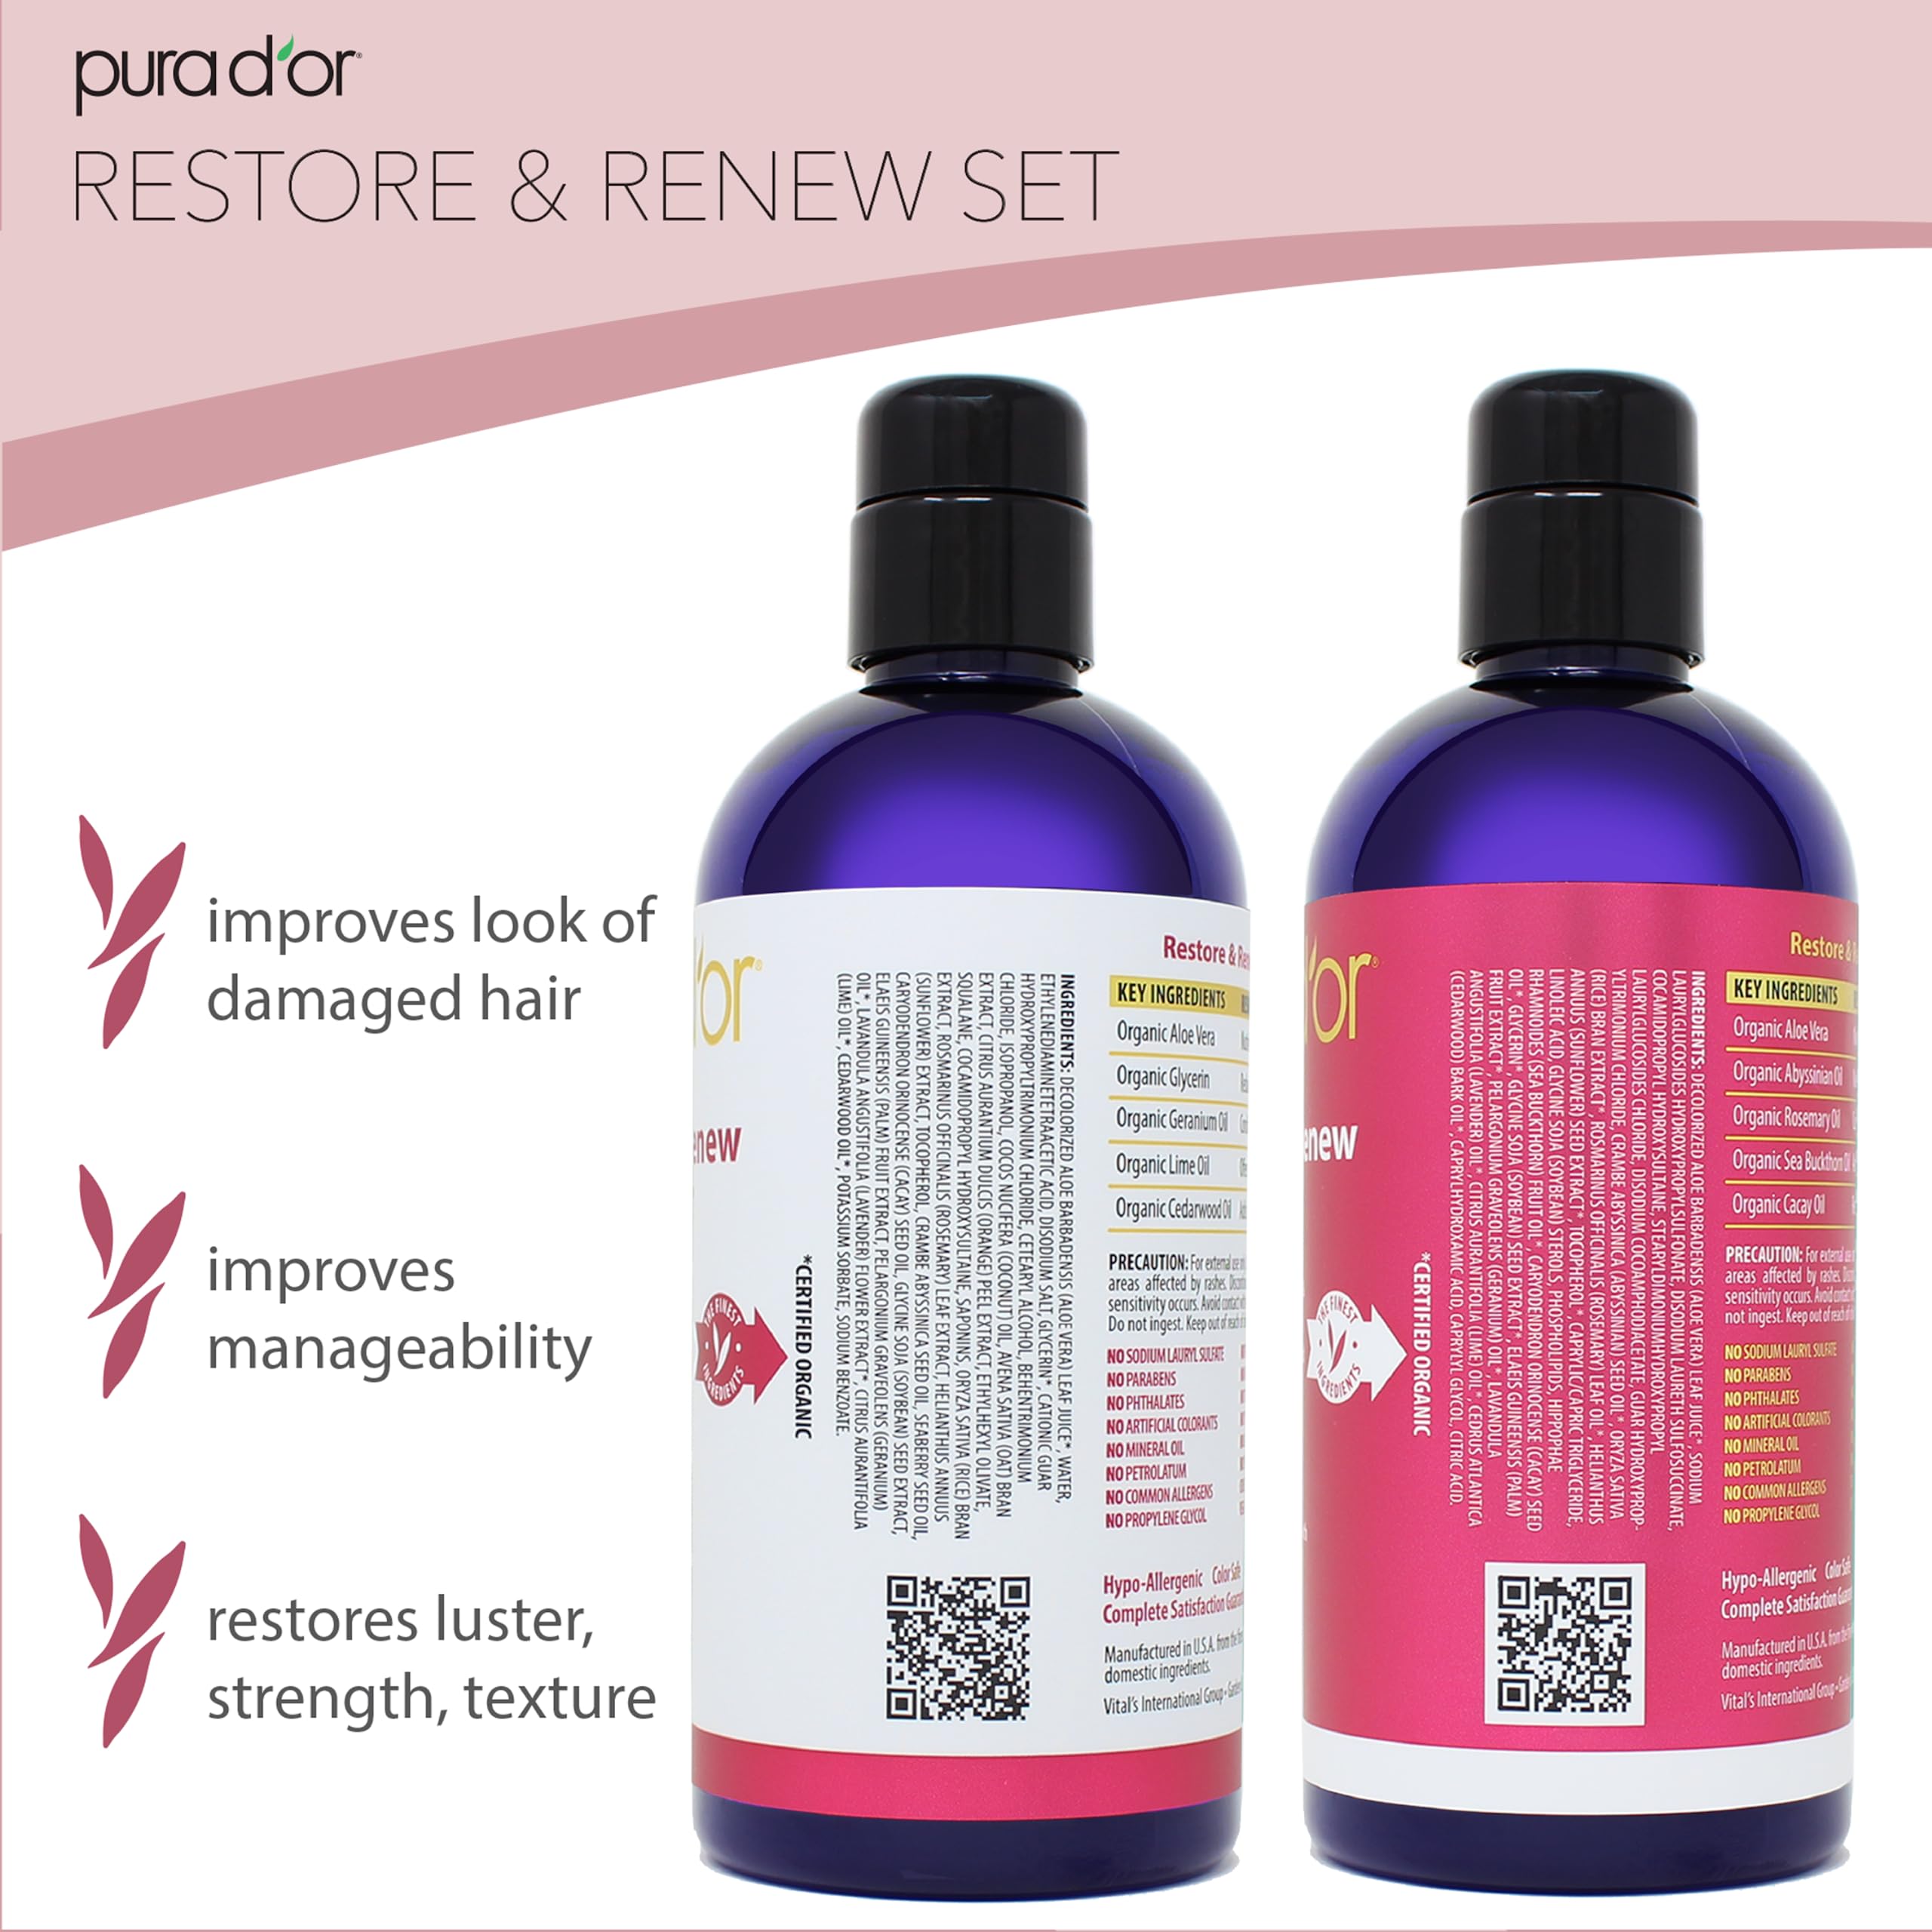 PURA D'OR Restore & Renew Shampoo and Conditioner Set For Strong, Healthy, and Nourished Hair with Organic Aloe Vera, Rosemary Oil, Sea Buckthorn, Cacay Oil, Coconut Oil, Seaberry Oil & Cedarwood Oil